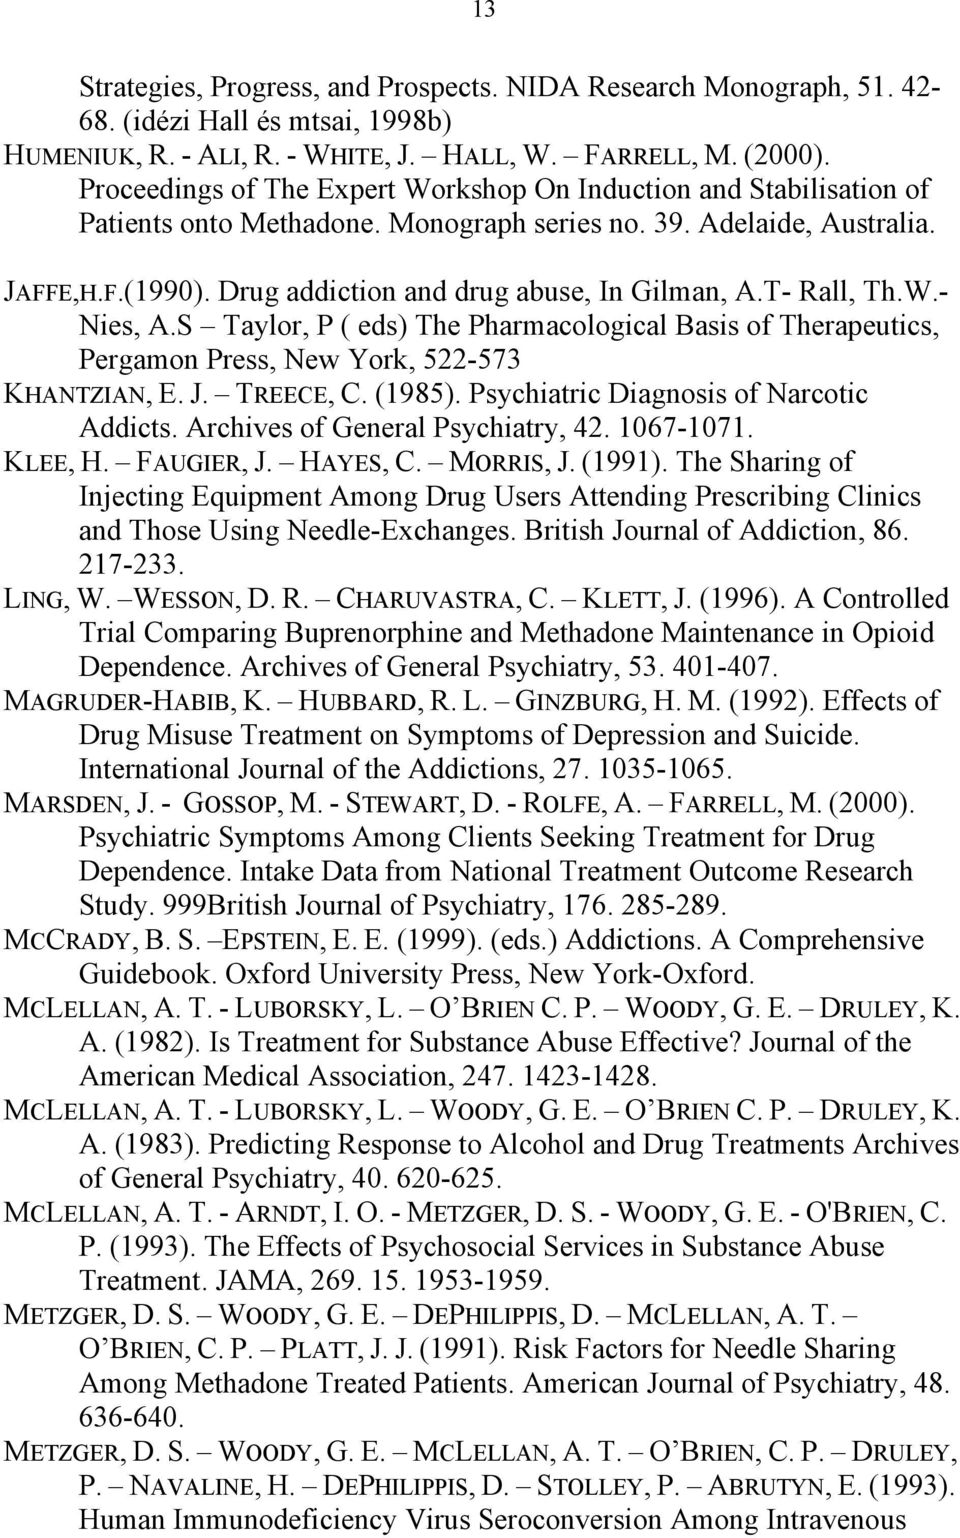 Drug addiction and drug abuse, In Gilman, A.T- Rall, Th.W.- Nies, A.S Taylor, P ( eds) The Pharmacological Basis of Therapeutics, Pergamon Press, New York, 522-573 KHANTZIAN, E. J. TREECE, C. (1985).